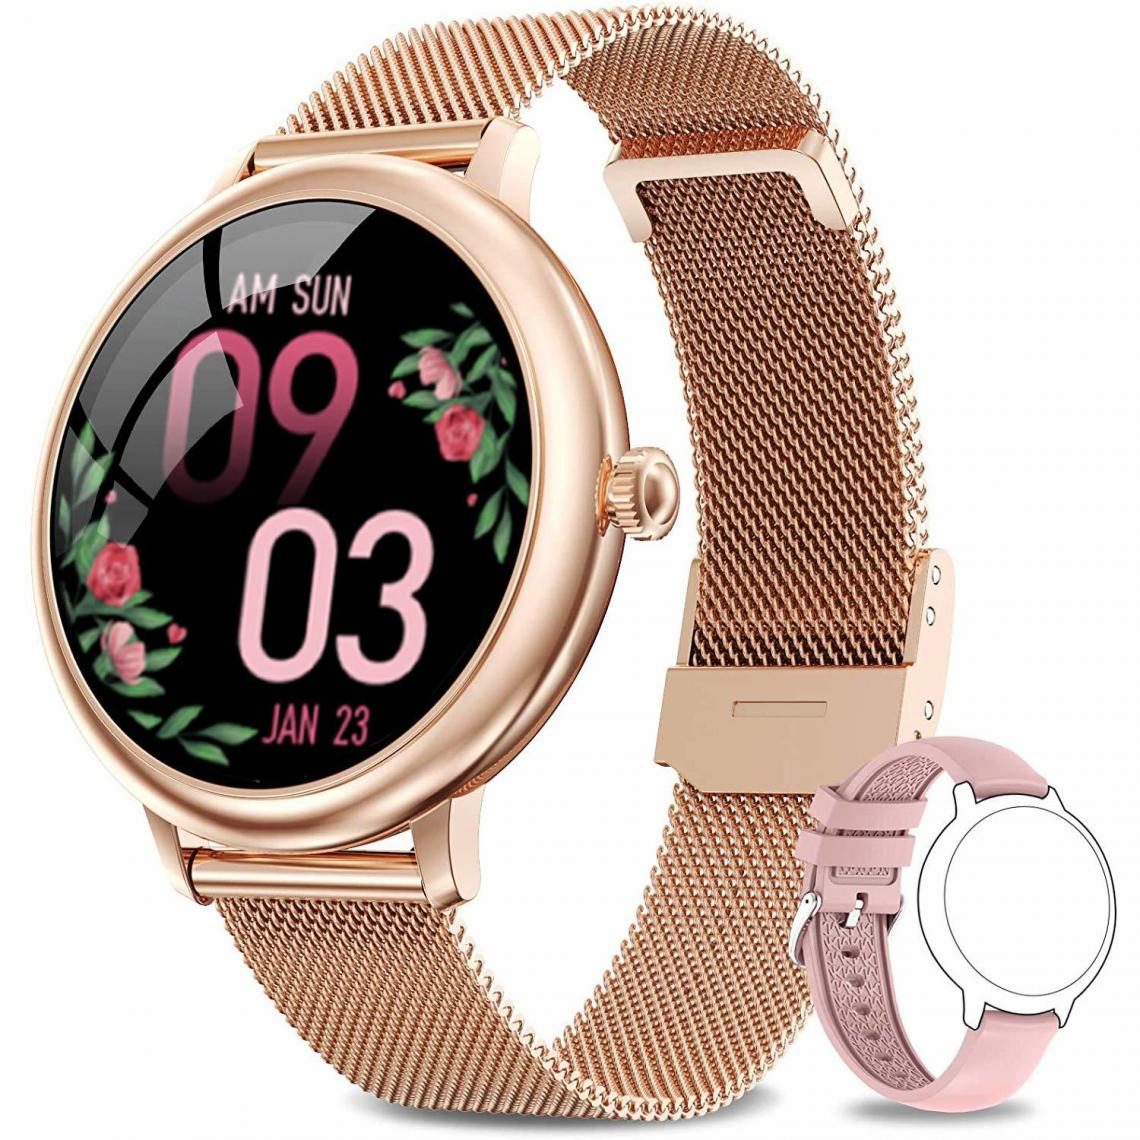 Chronotech Montres - Chronus Smart Watch , Full Touch Fitness Watch Tracker with Female Function Heart Rate Monitor Blood Pressure Ladies Smart watches IP67 Waterproof (gold) - Montre connectée